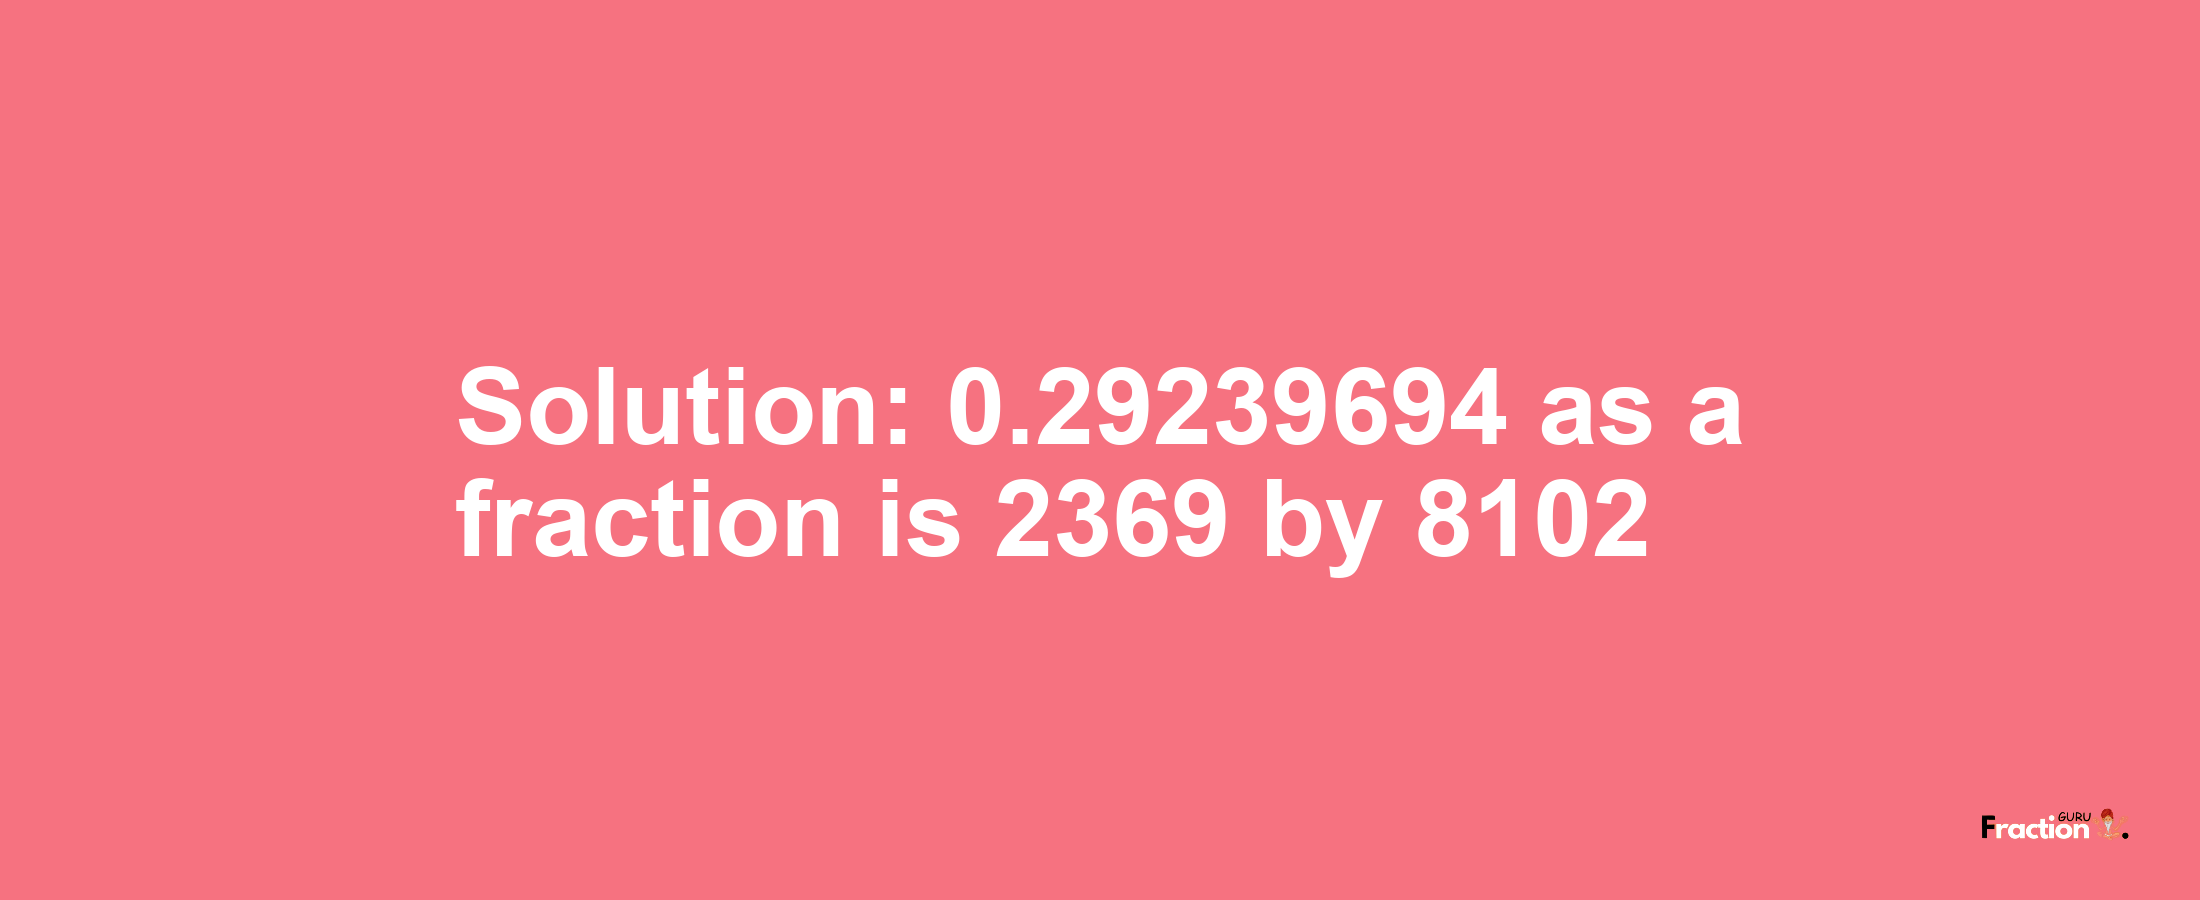 Solution:0.29239694 as a fraction is 2369/8102